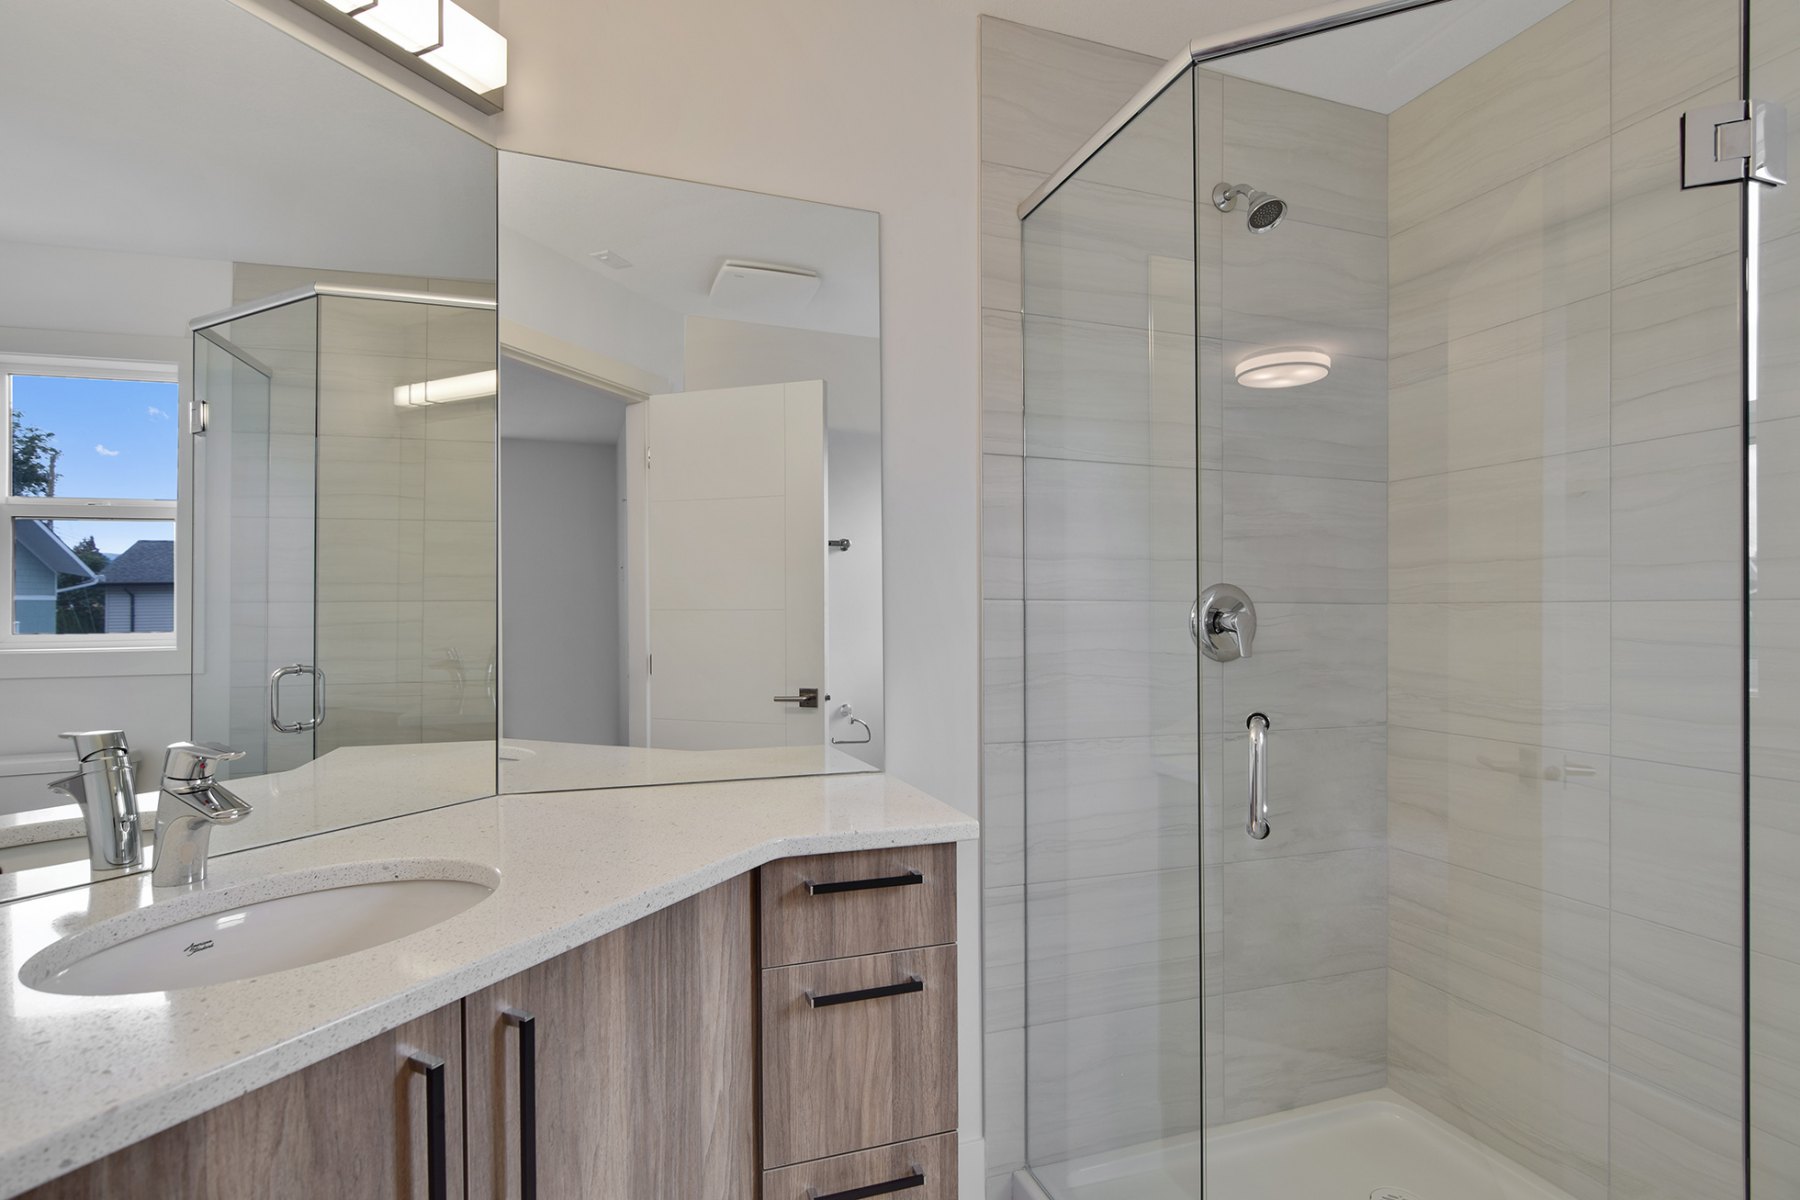 1_harmony_homes_cadder_avenue_infill_project_bath_room_gallery_image_17